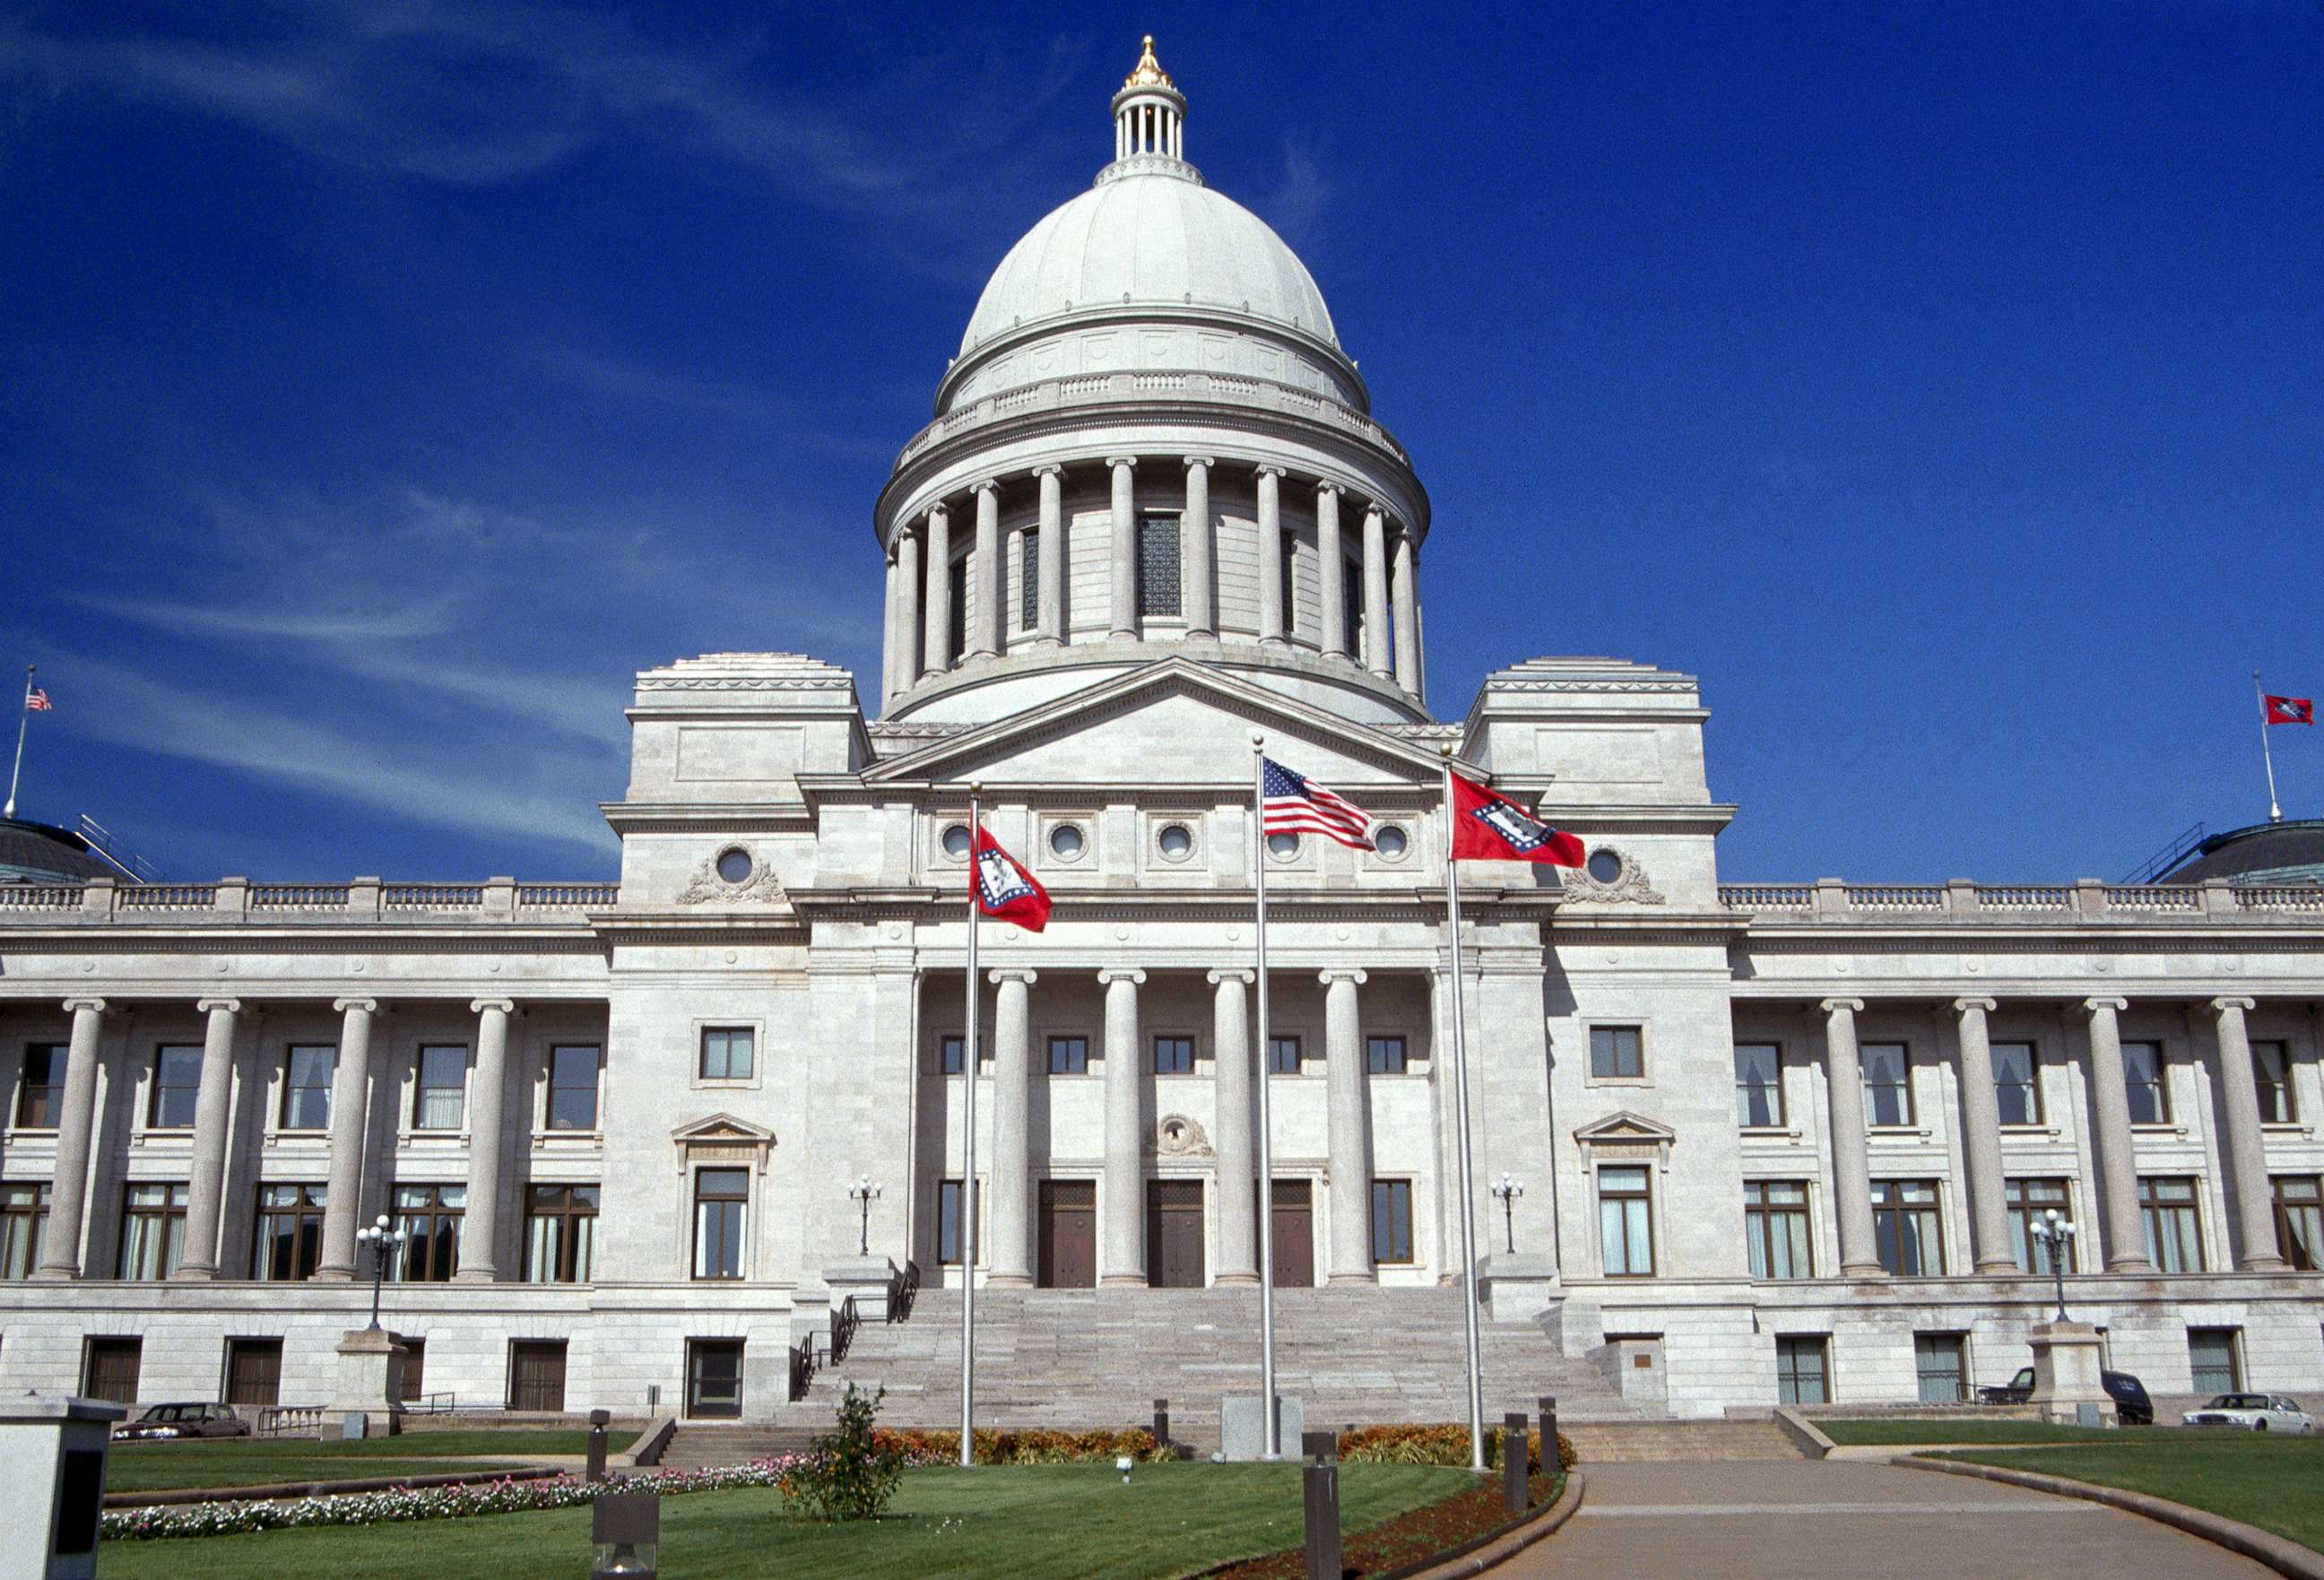 PHOTO: In this undated file photo, the Arkansas State Capitol is shown in Little Rock, Arkansas.